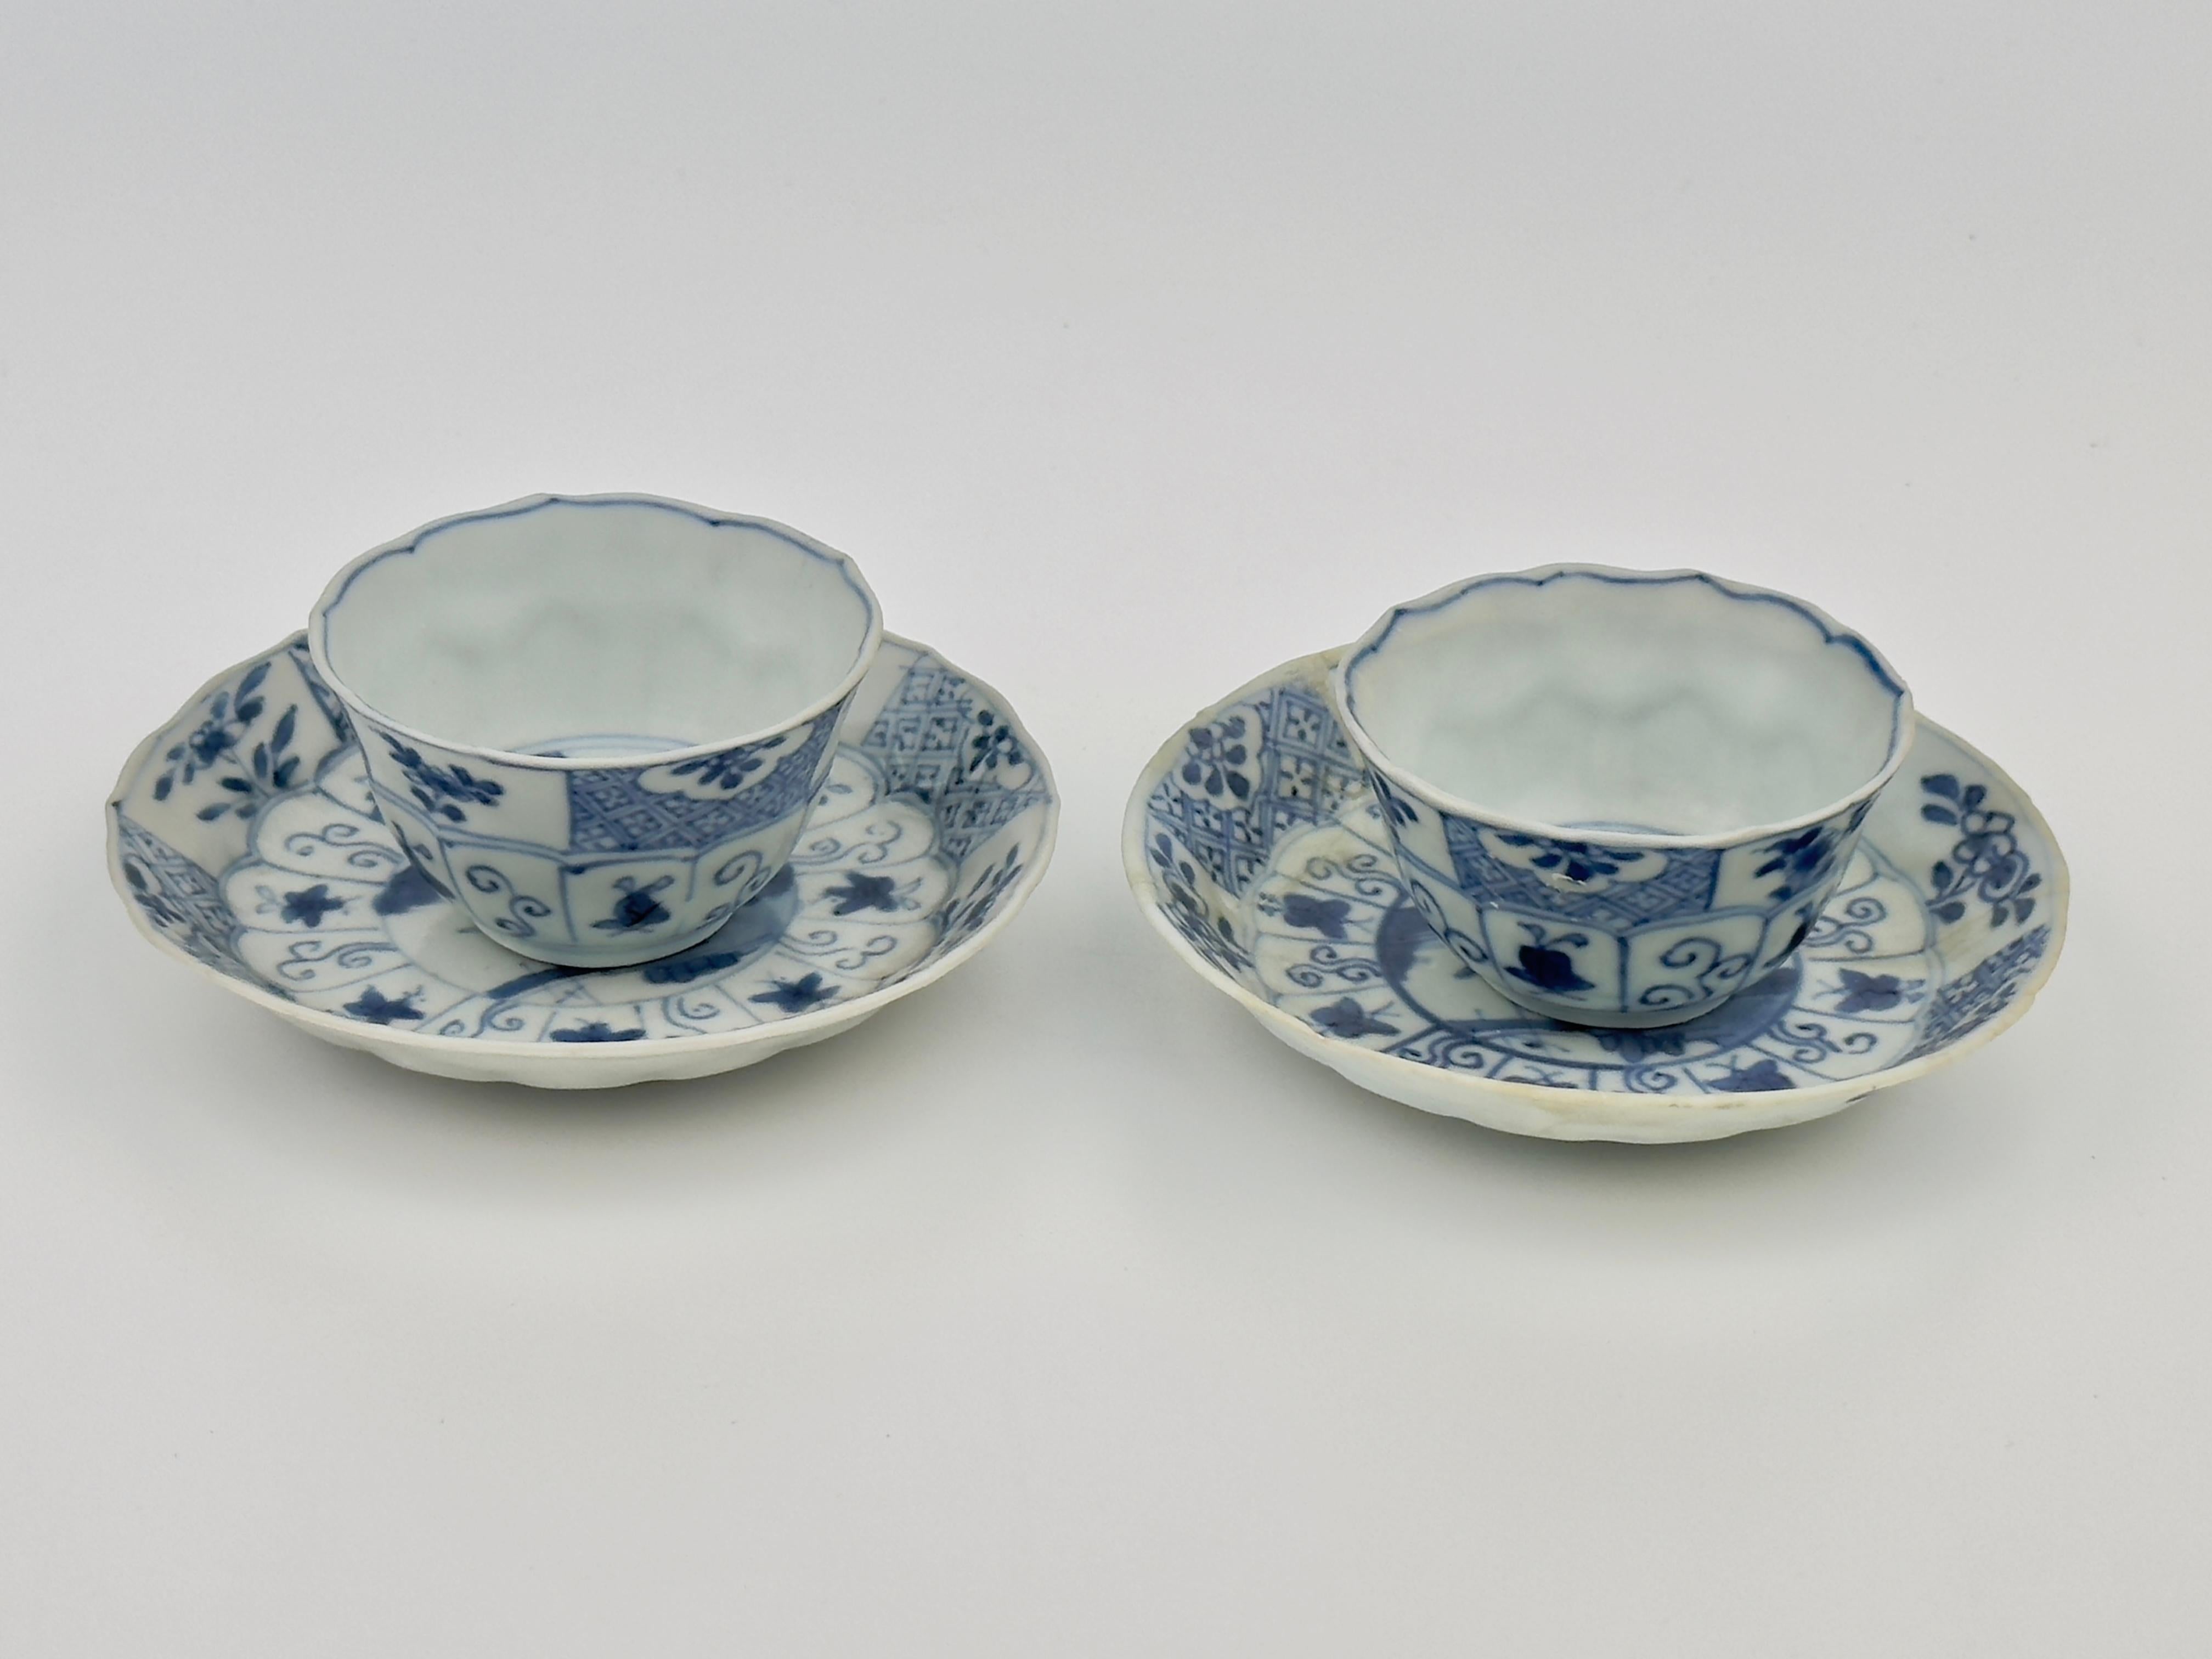 Blue and white tea set c 1725, Qing dynasty, Yongzheng reign For Sale 4